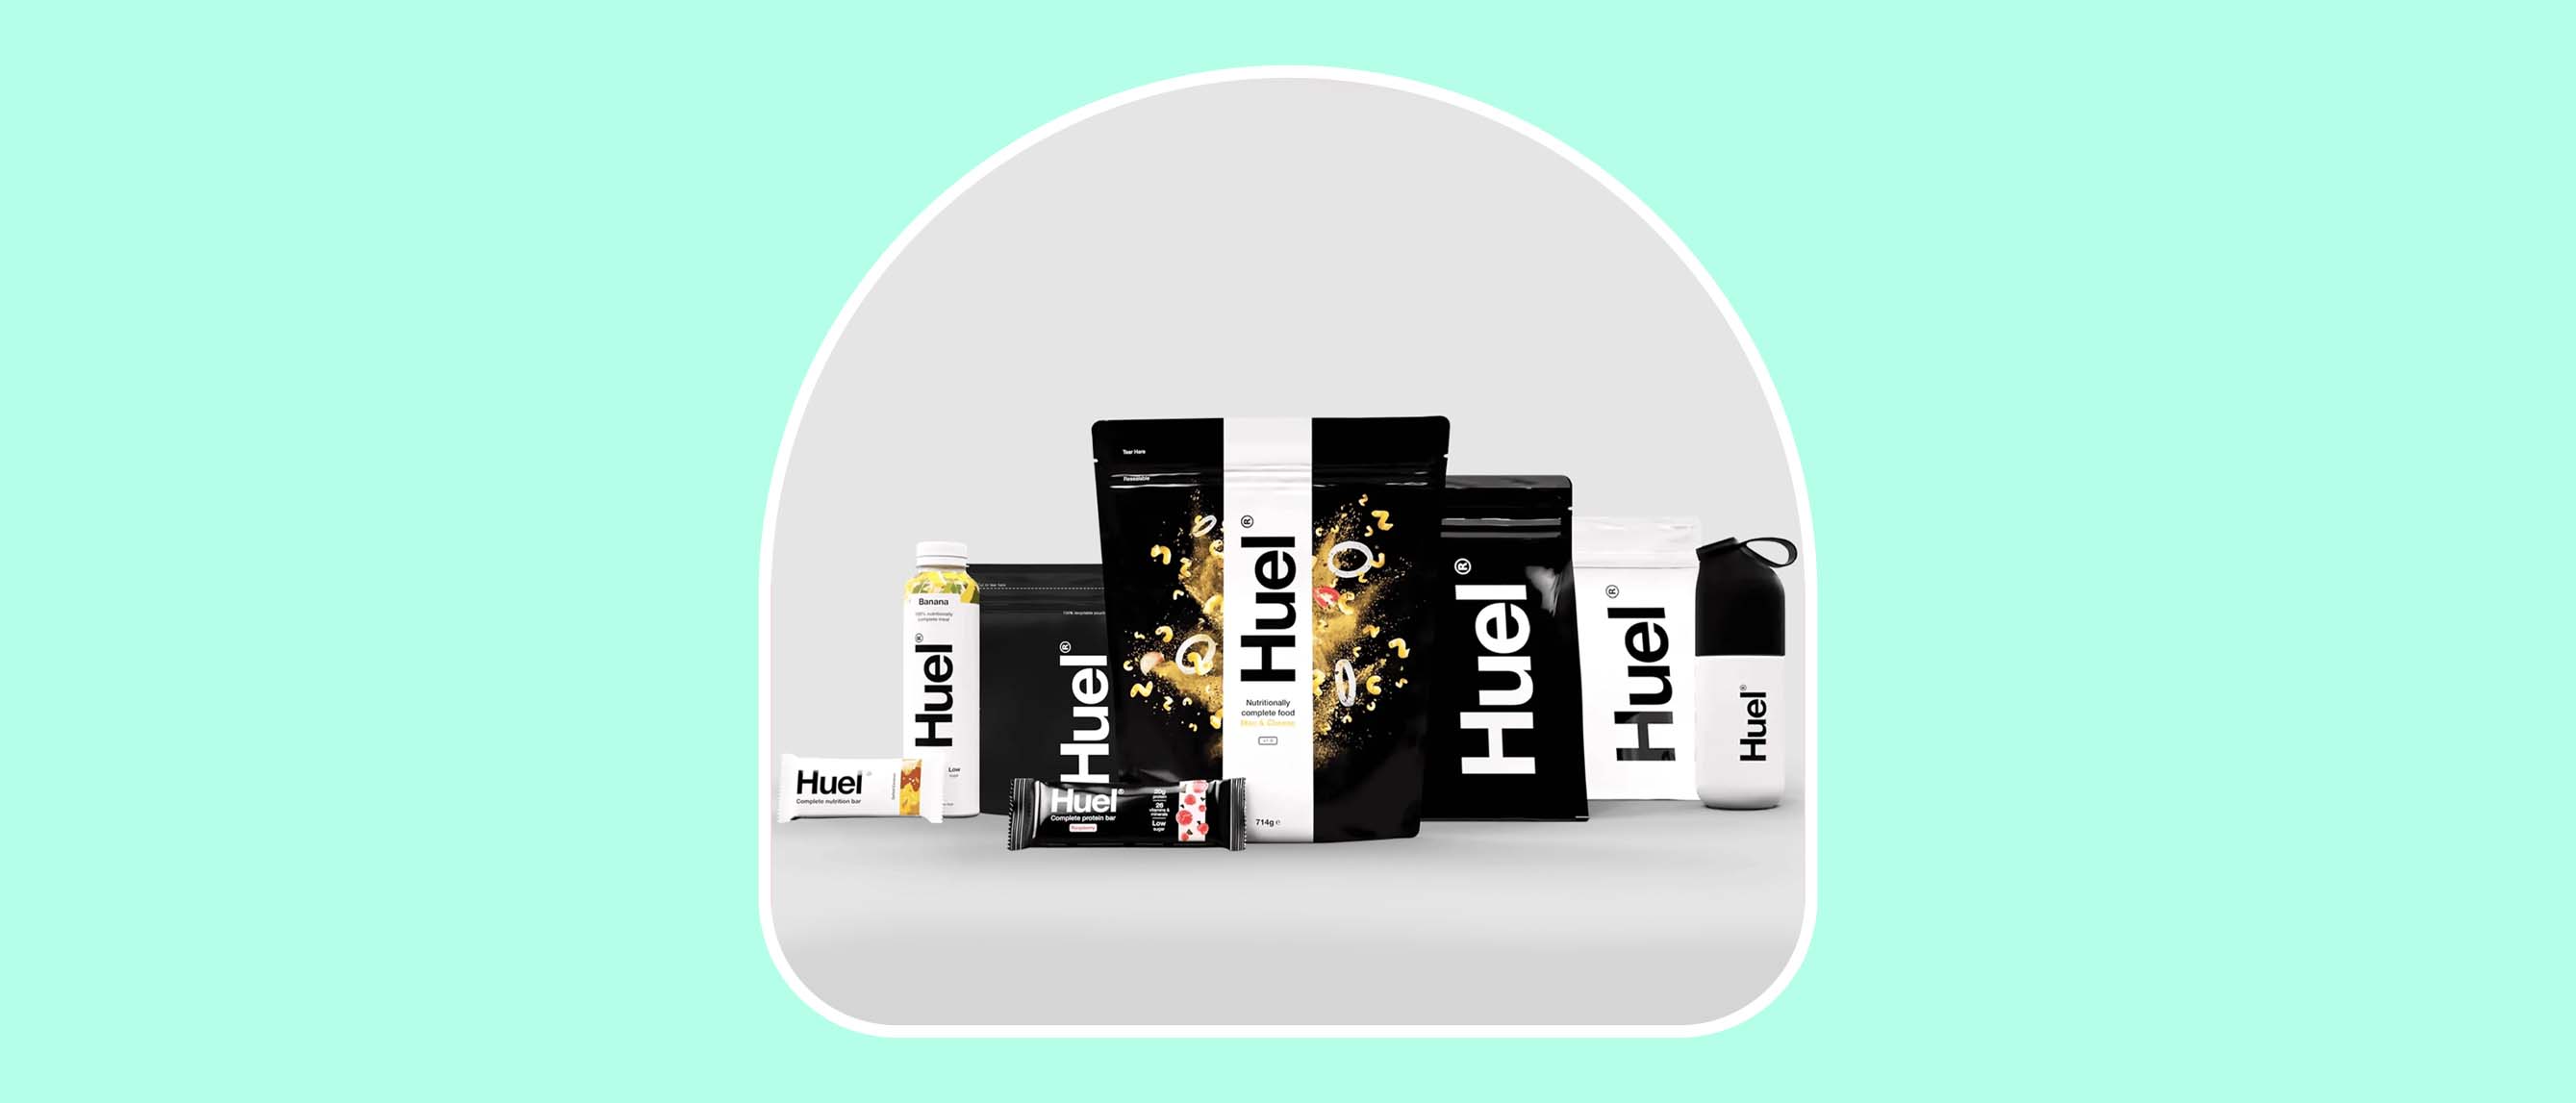 Huel Starter Kit - Includes 2 Pouches of Nutritionally Complete 100% Vegan  Powdered Meal, Scoop, Shaker and Booklet (7.7lbs of Powder - 28 Meals)